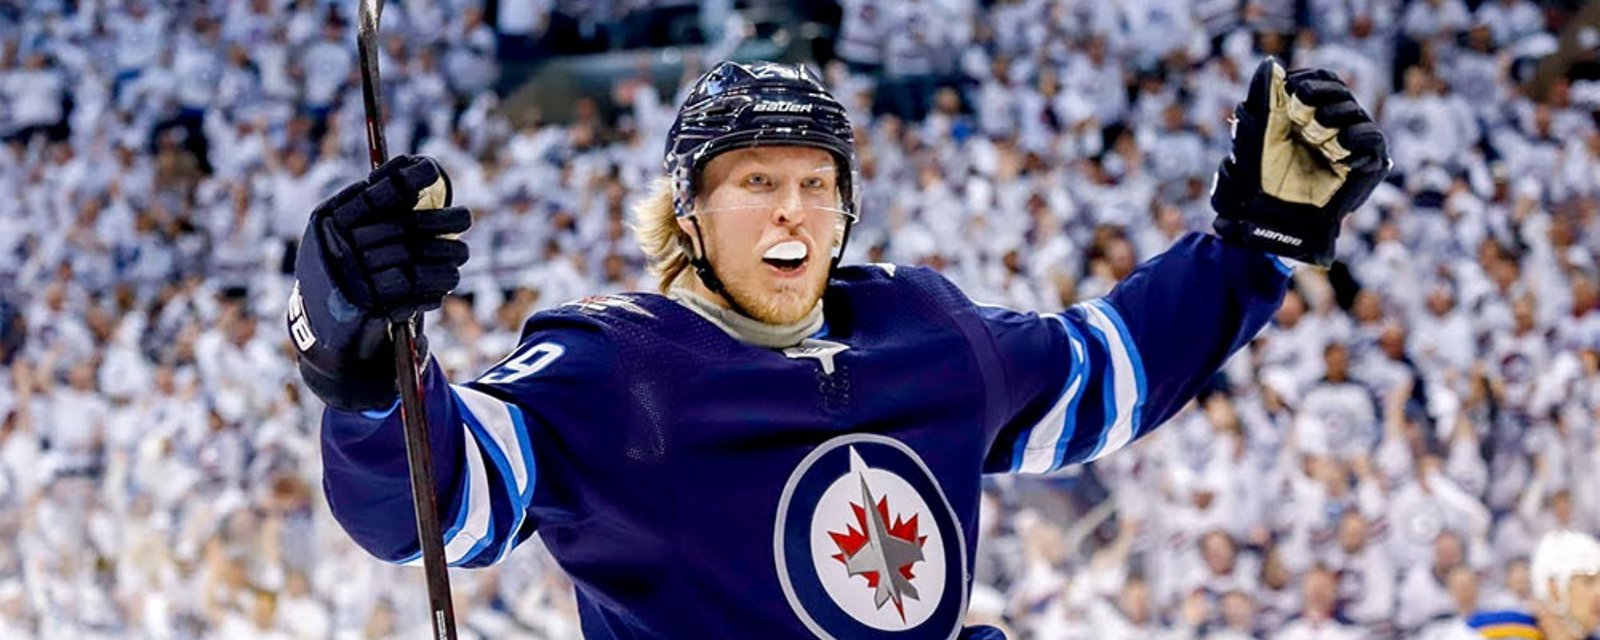 Rumor: Laine reportedly turns down two year deal from Jets